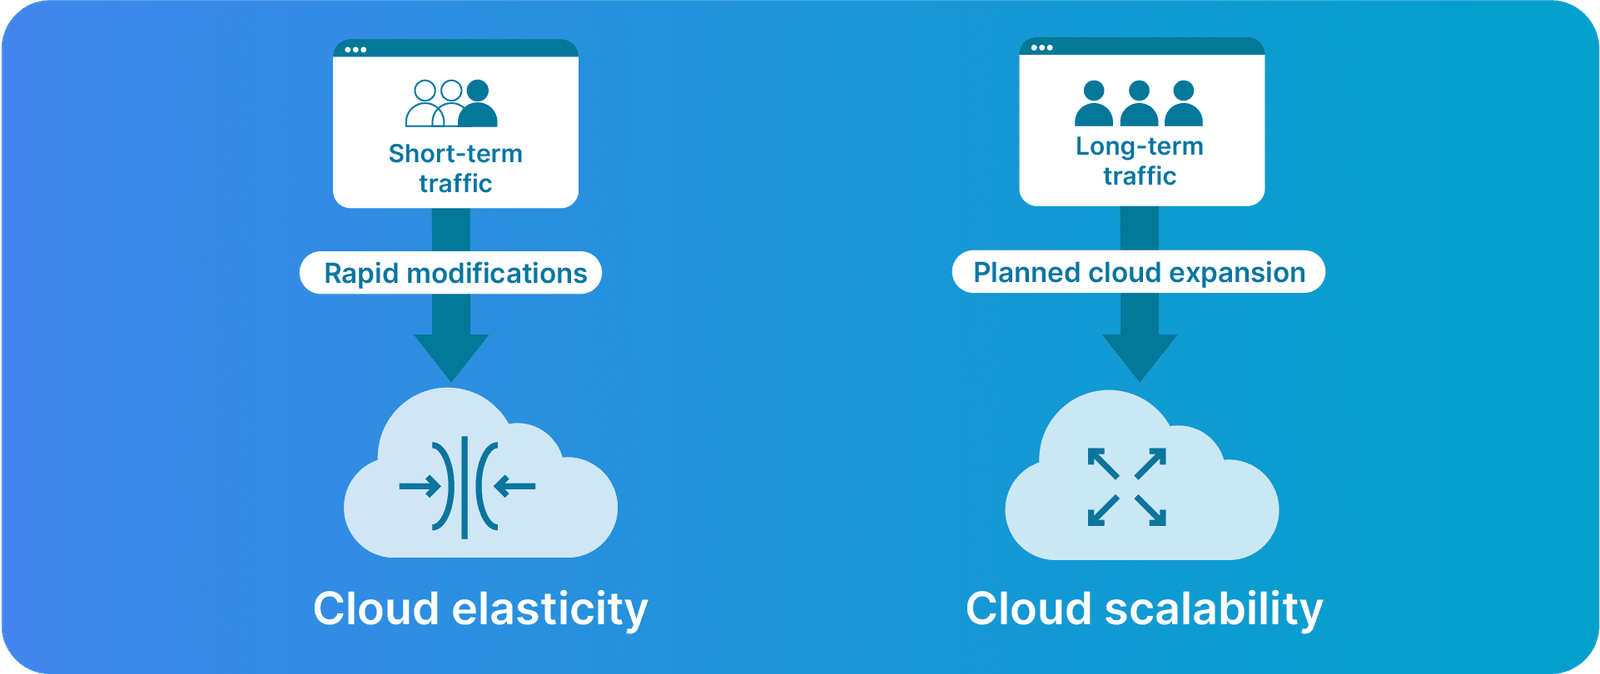 The difference between cloud elasticity and cloud scalability.